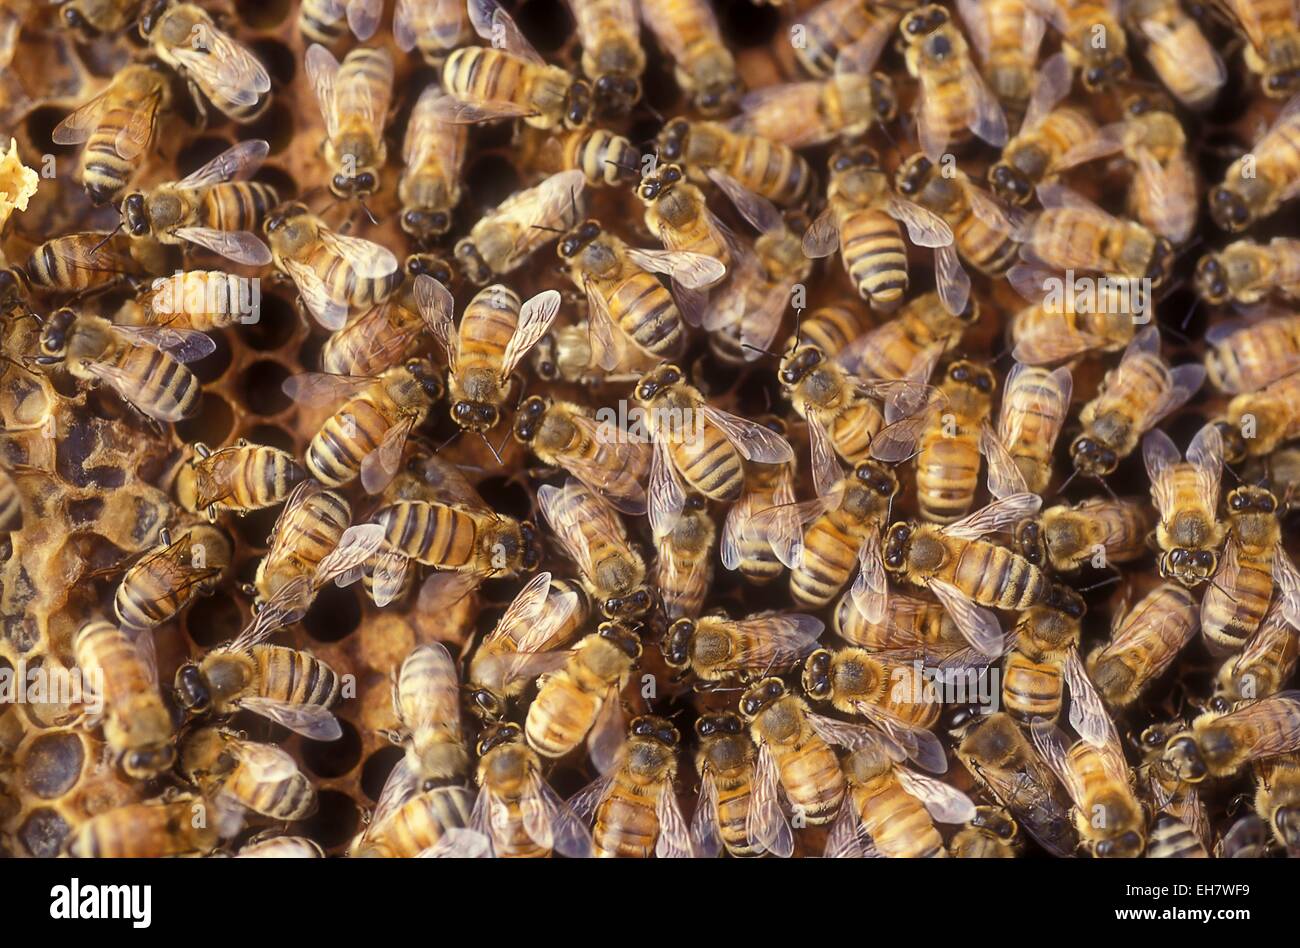 Worker bees on a honeycomb Stock Photo